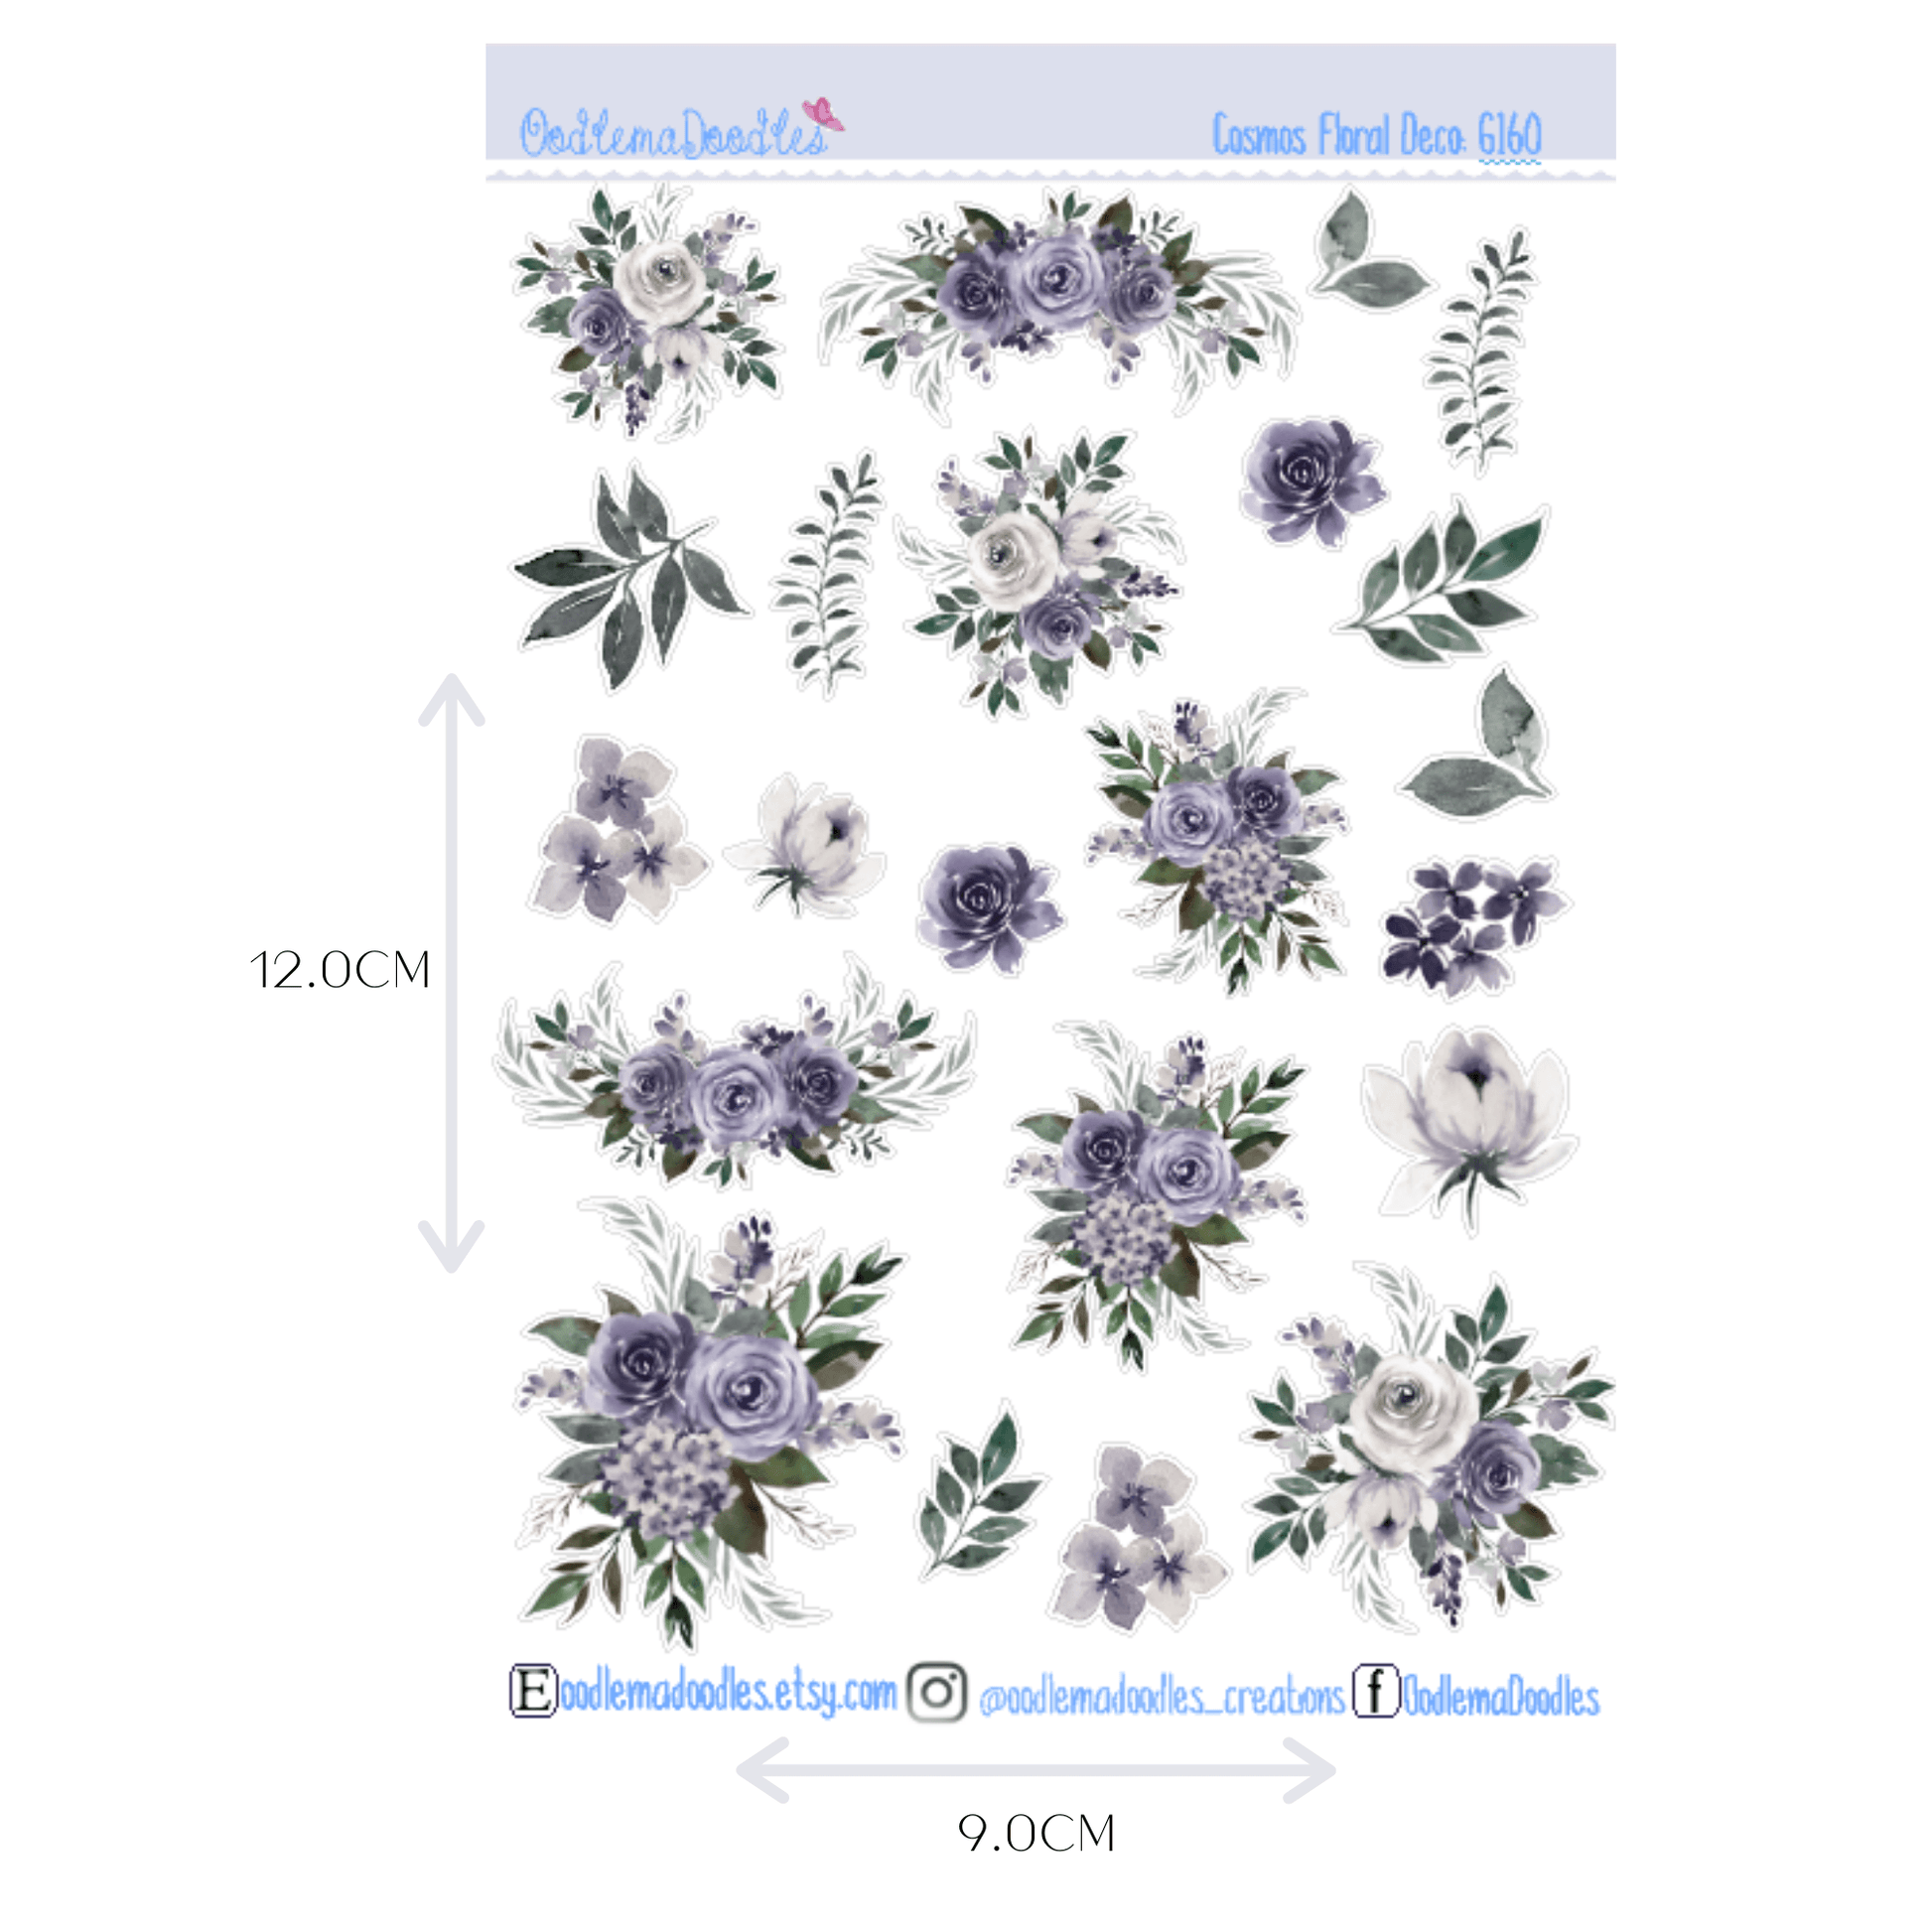 Cosmos Floral Decorative Stickers - oodlemadoodles